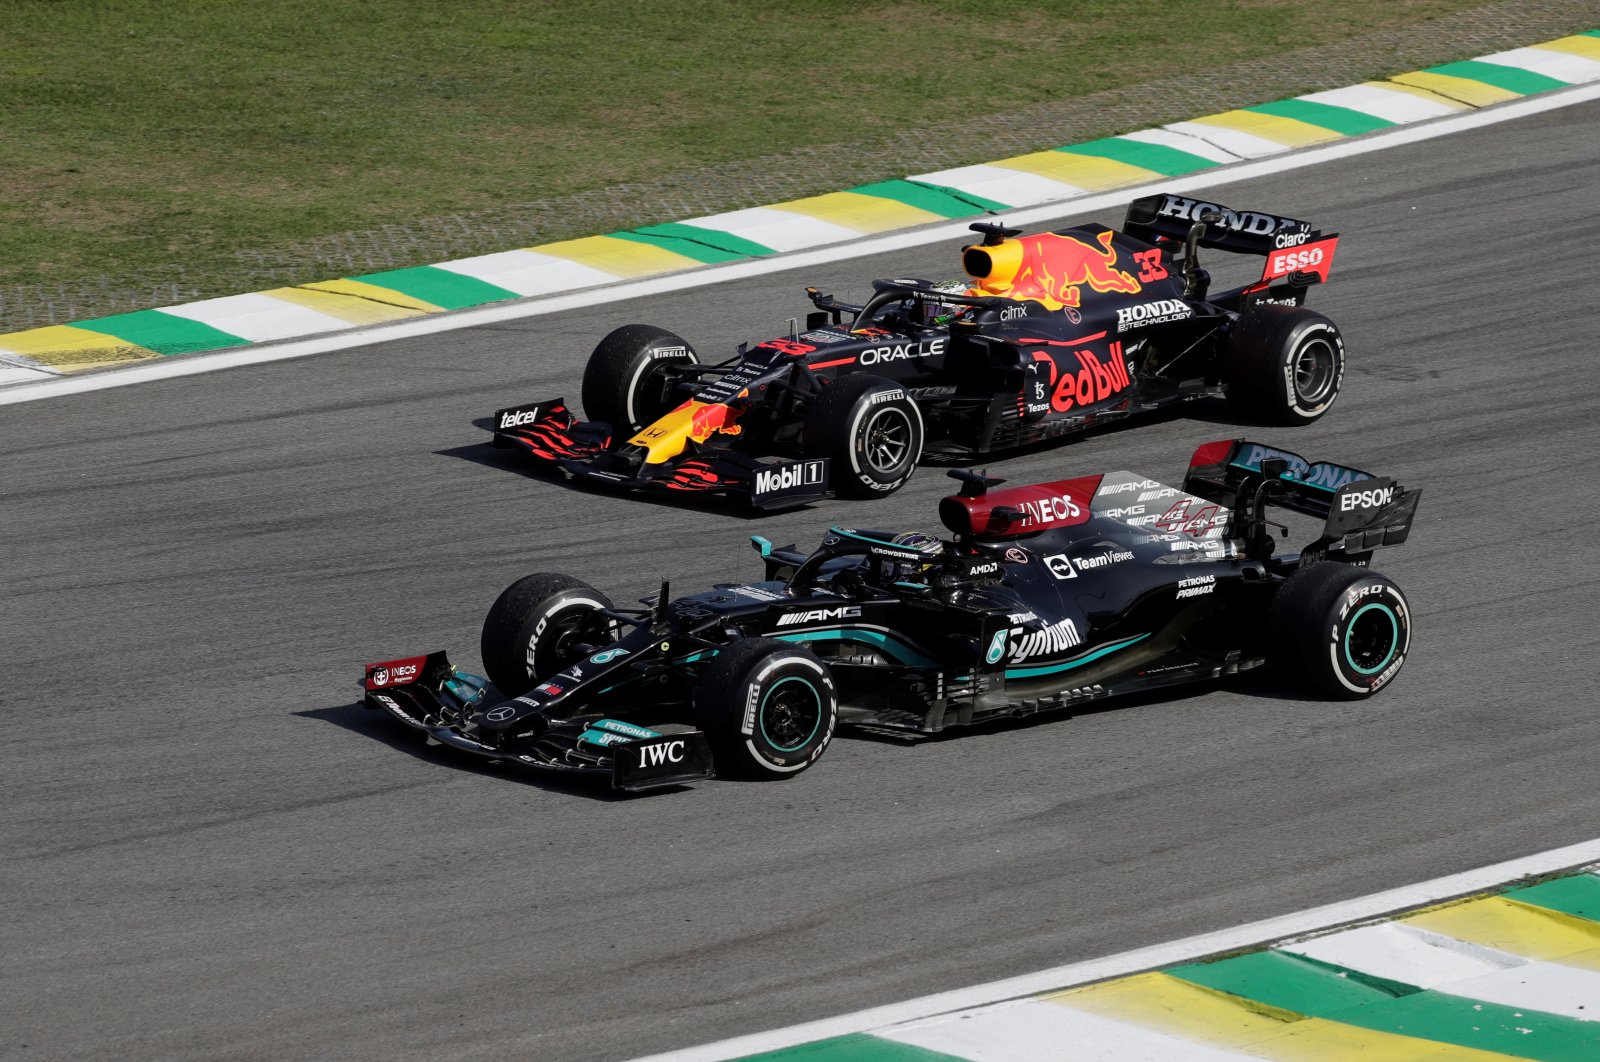 Mercedes&#039; Lewis Hamilton (front) and Red Bull&#039;s Max Verstappen compete during the Brazilian Formula 1 GP at the Jose Carlos Pace racetrack in Sao Paulo, Brazil, Nov. 14, 2021. (EPA Photo)